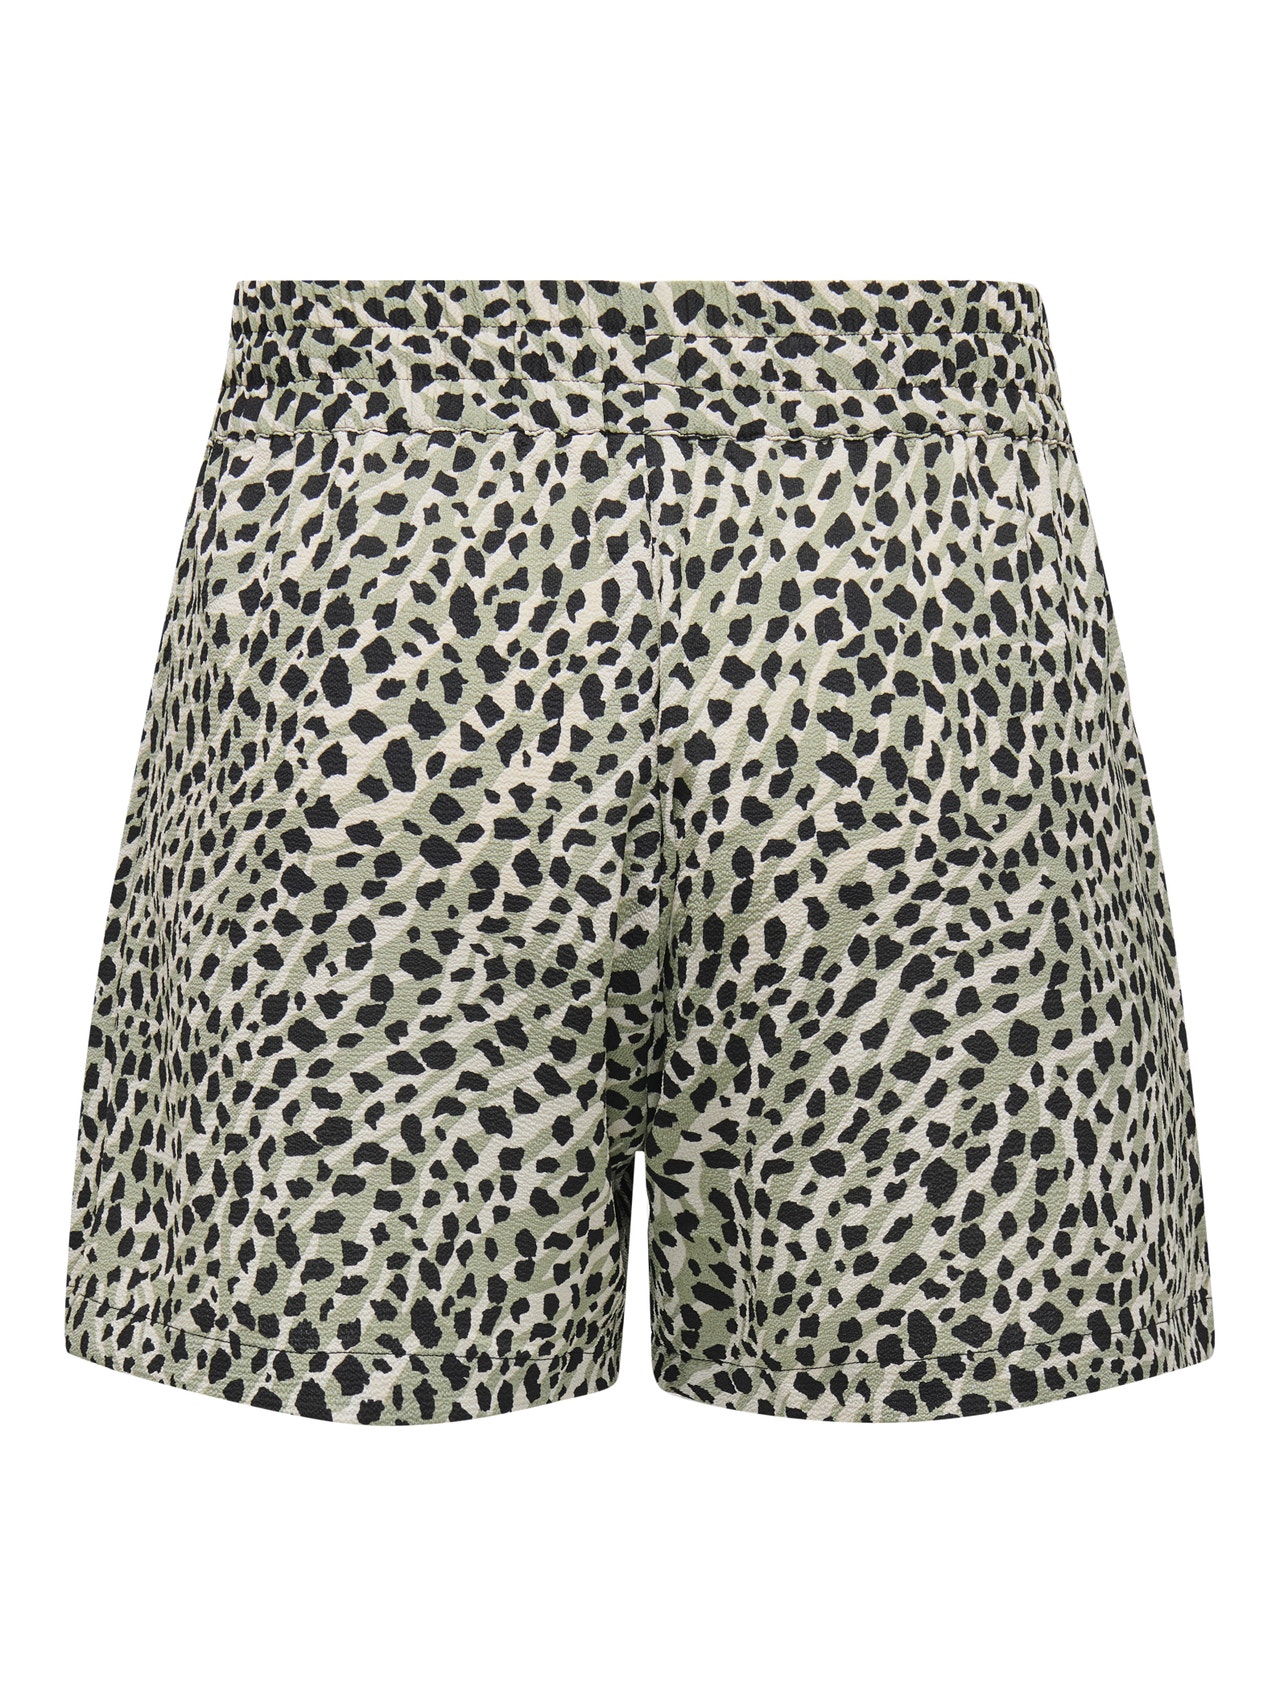 ONLY Curvy bindebånd shorts -Seagrass - 15312230